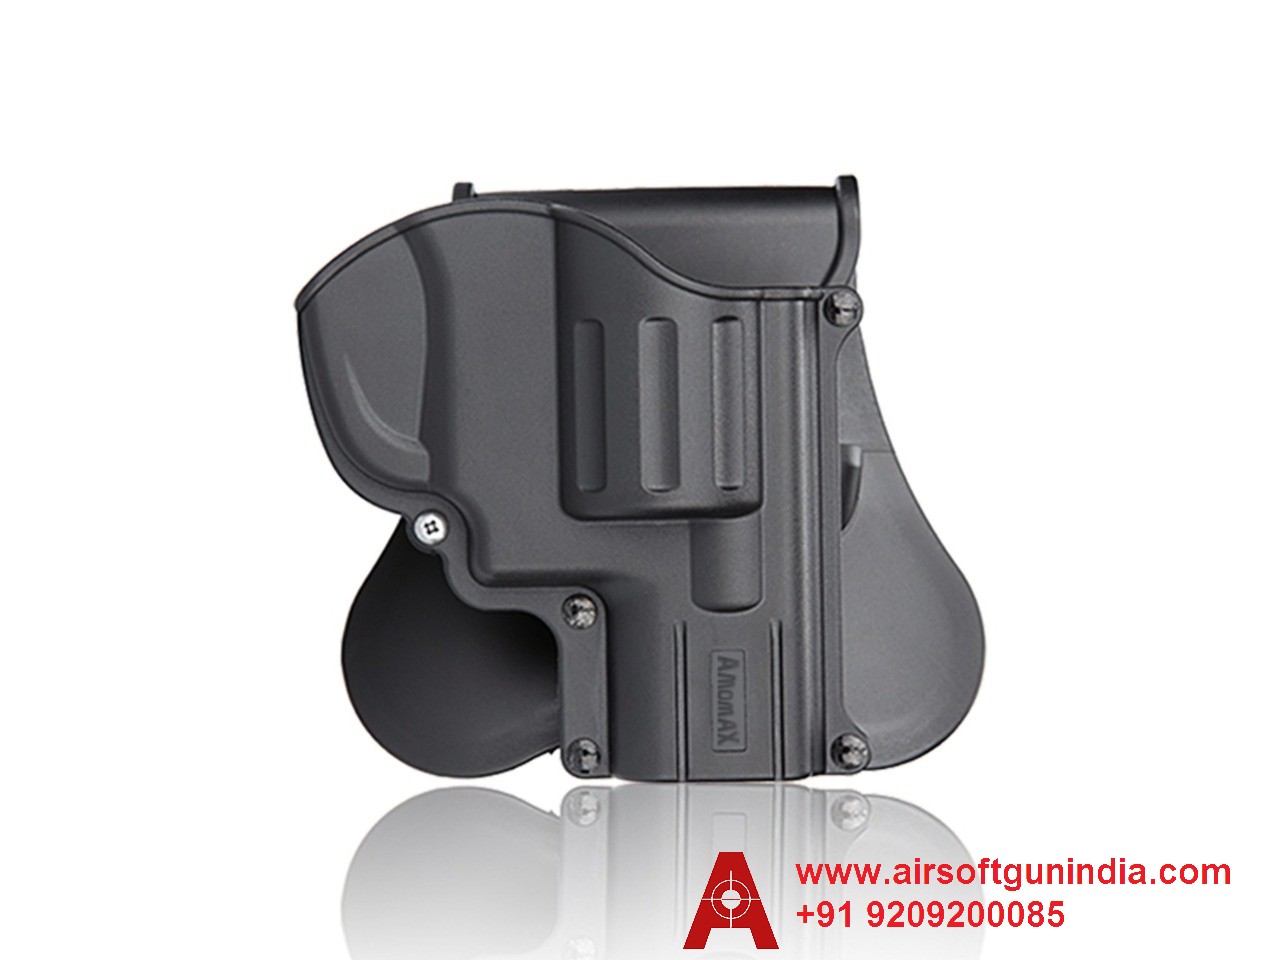 Holster For Smith And Wesson J Series Revolver By Airsoft Gun India